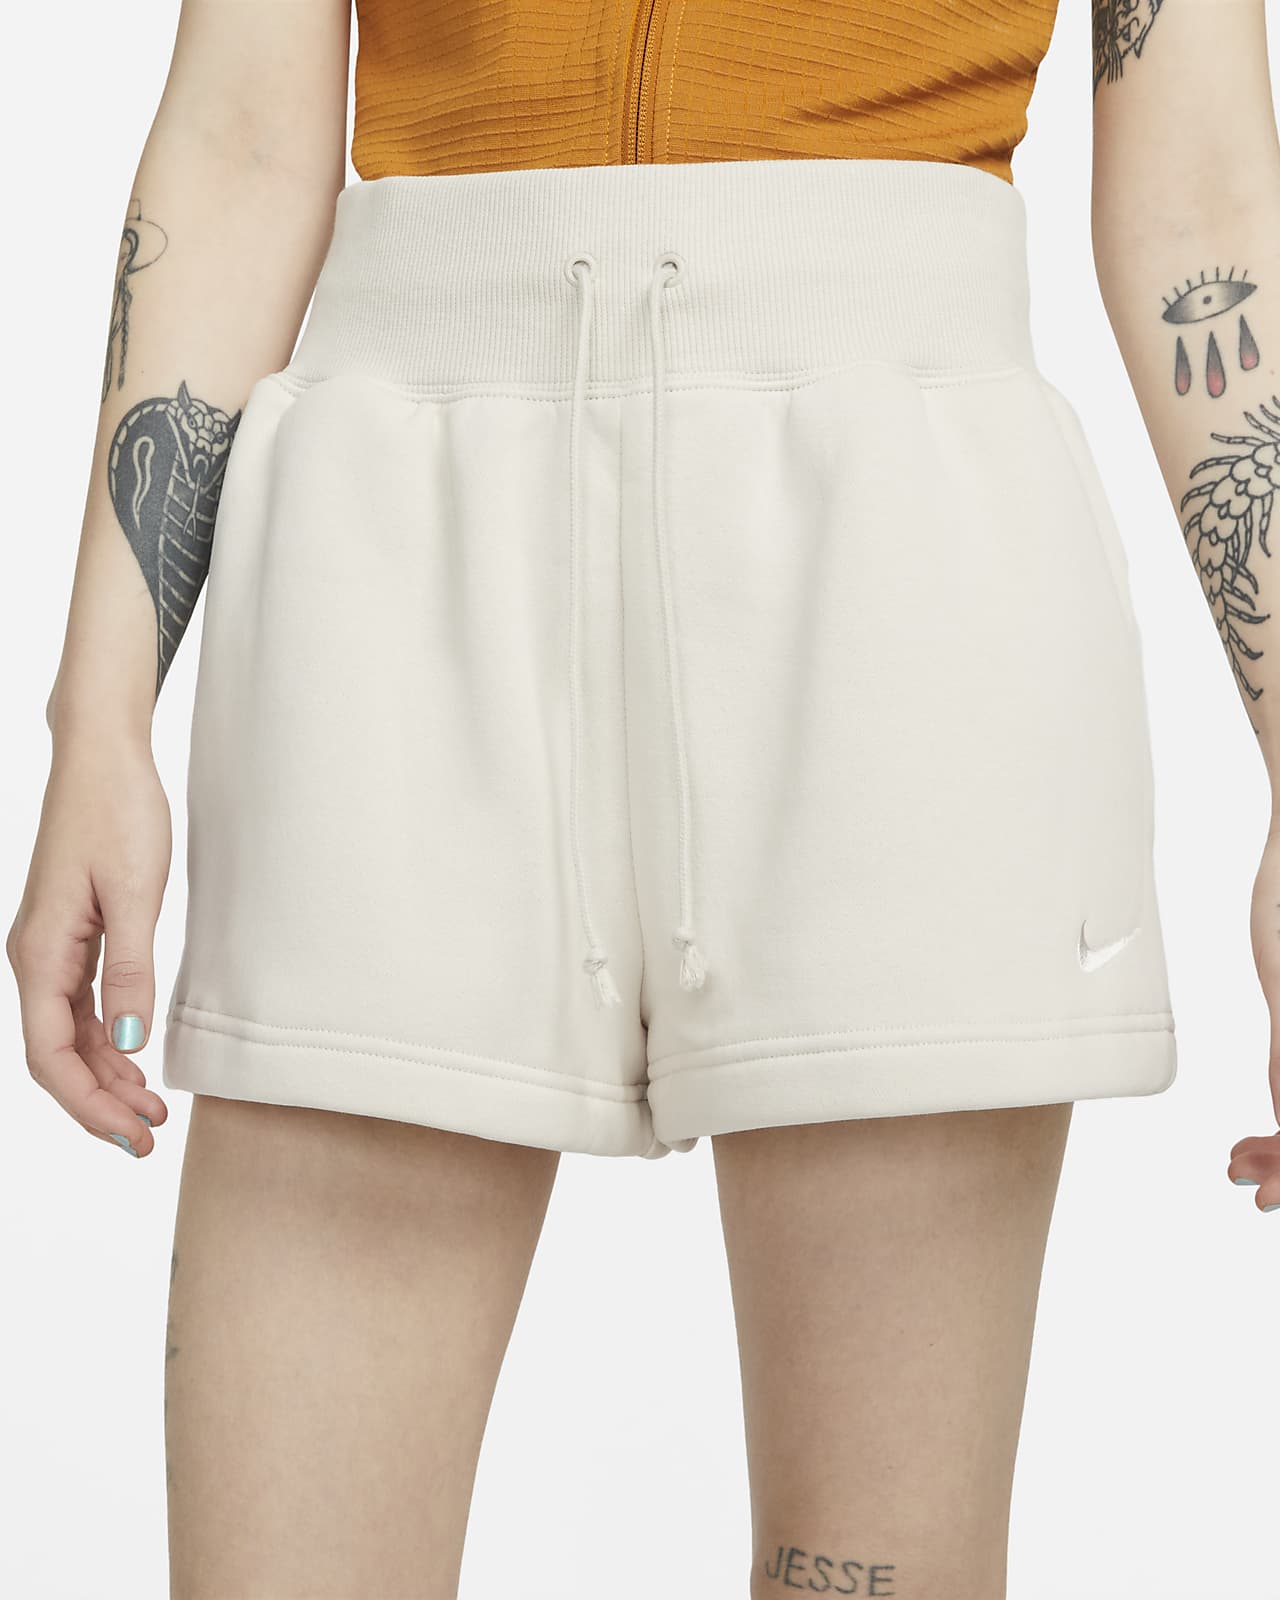 All Products High Waisted Phoenix Fleece Shorts.